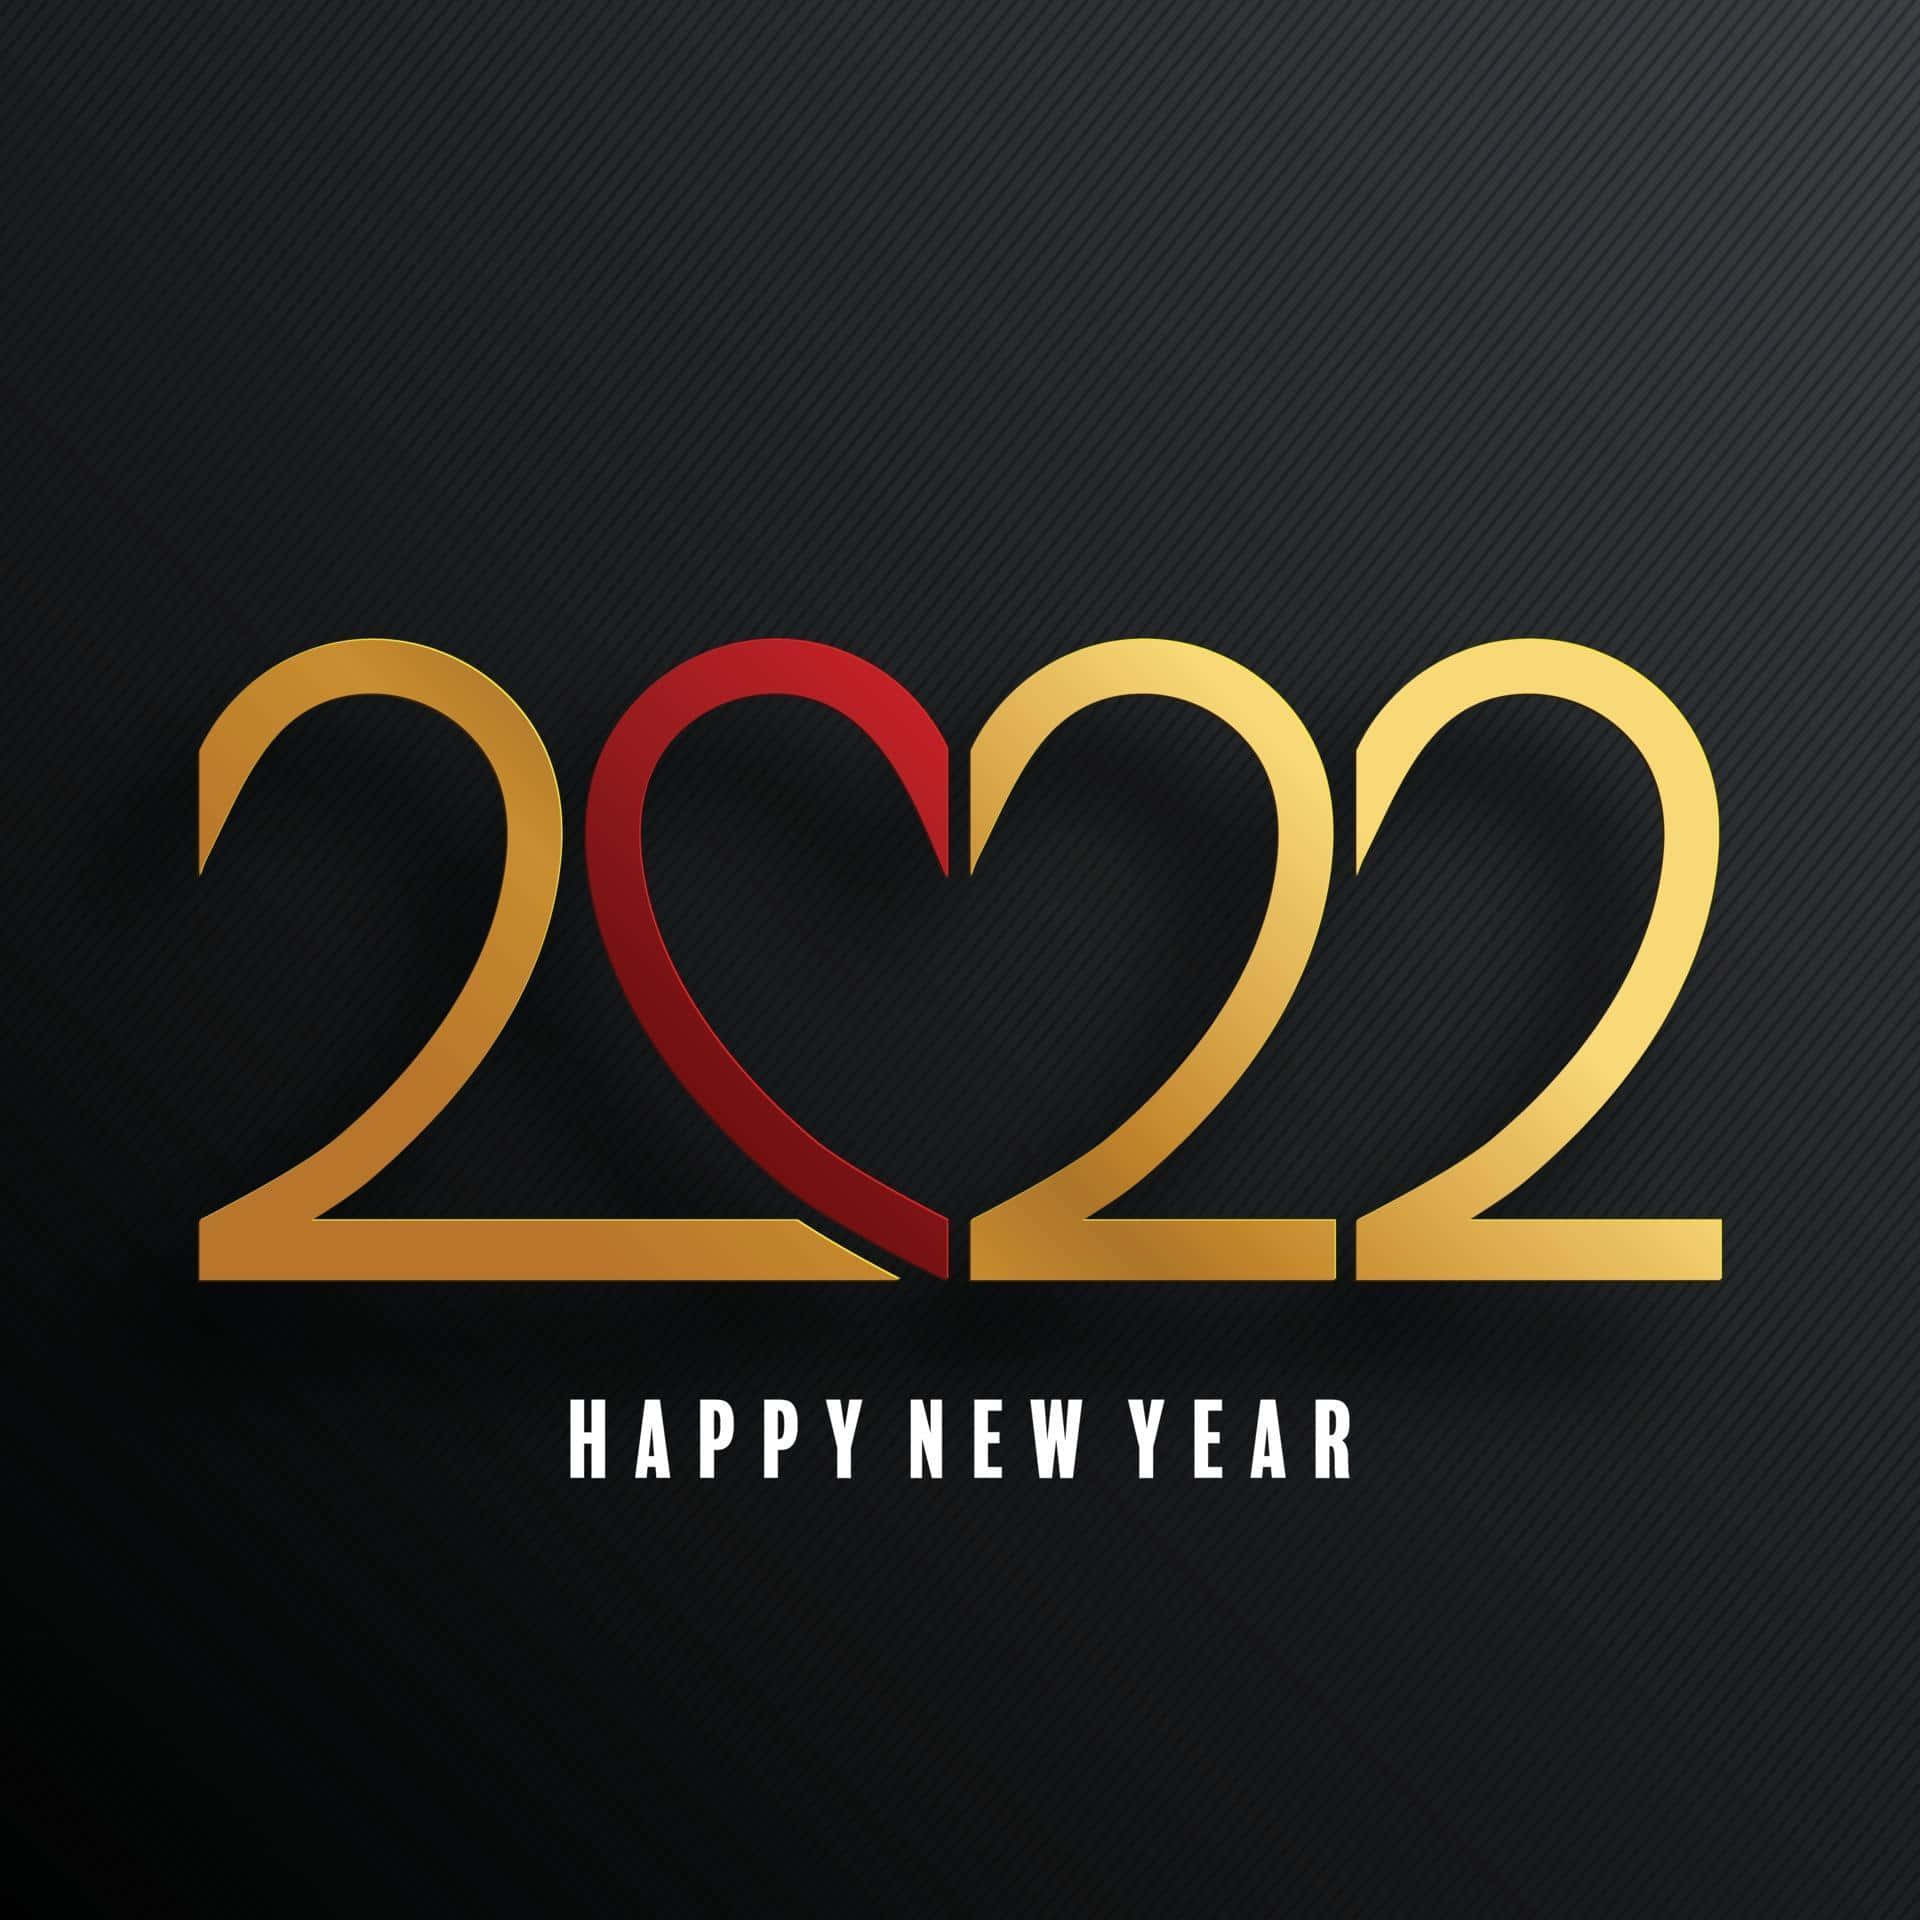 Wishing You a Happy and Prosperous New Year 2022!